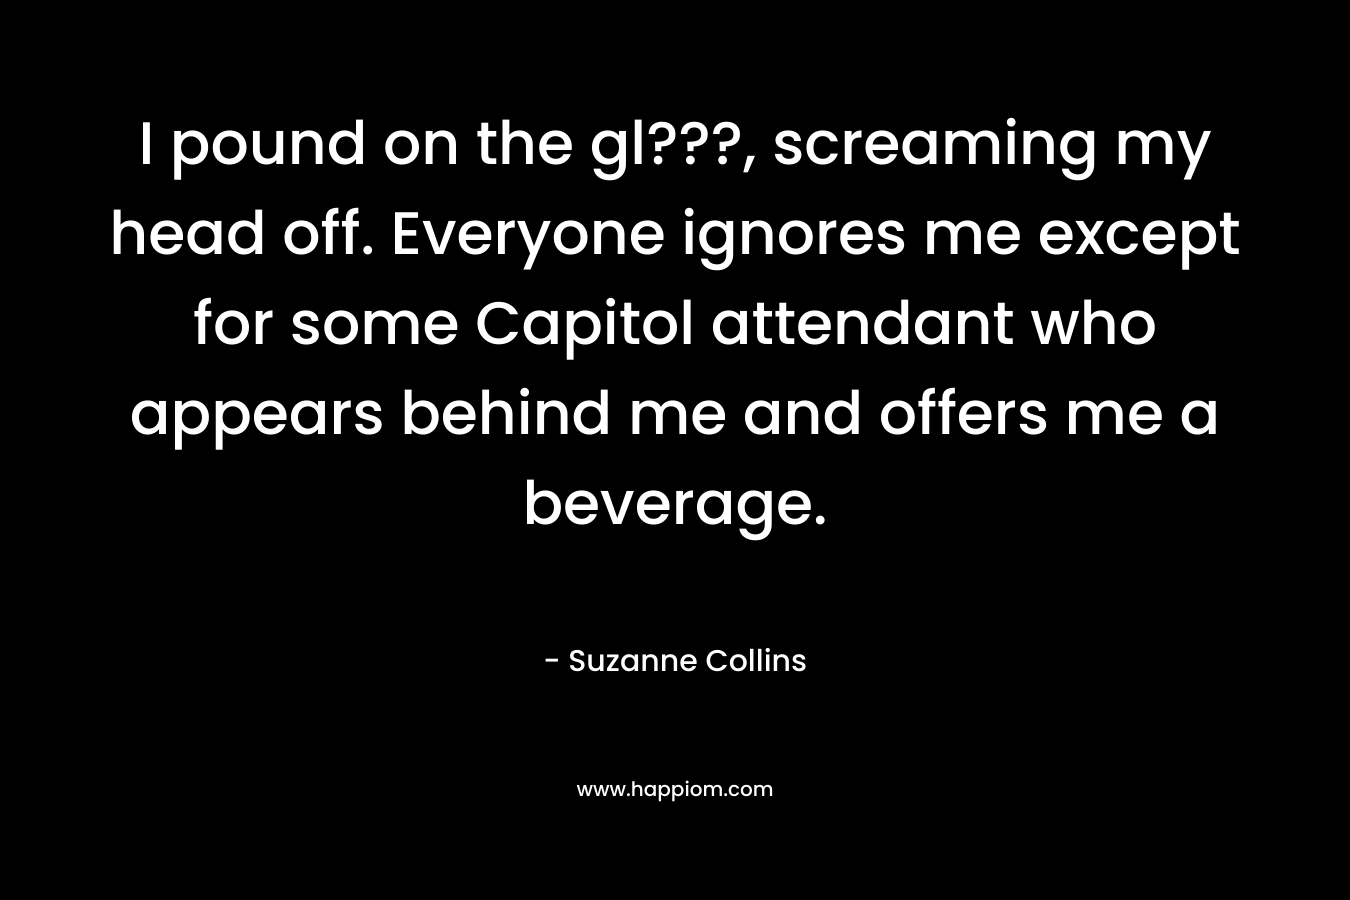 I pound on the gl???, screaming my head off. Everyone ignores me except for some Capitol attendant who appears behind me and offers me a beverage.